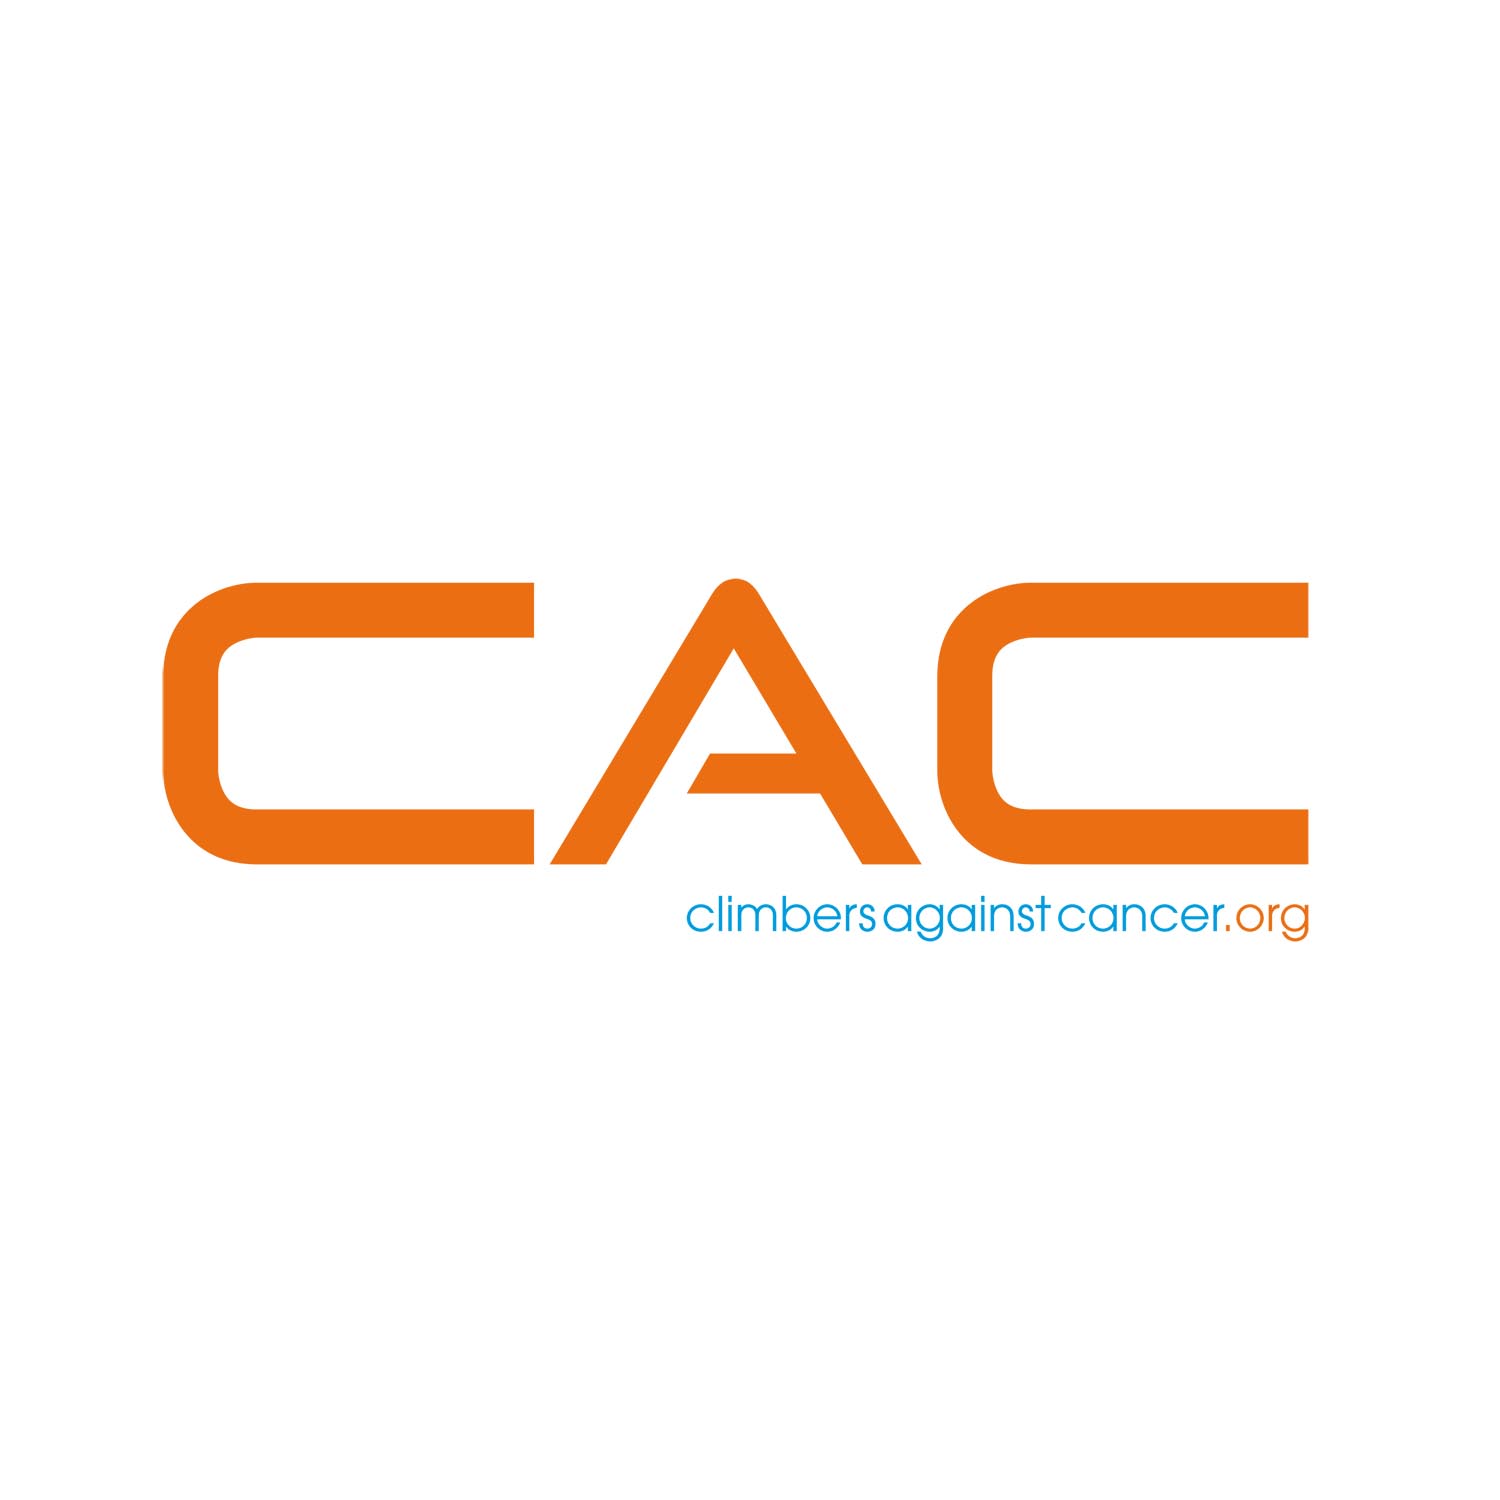 CAC - CLIMBERS AGAINST CANCER